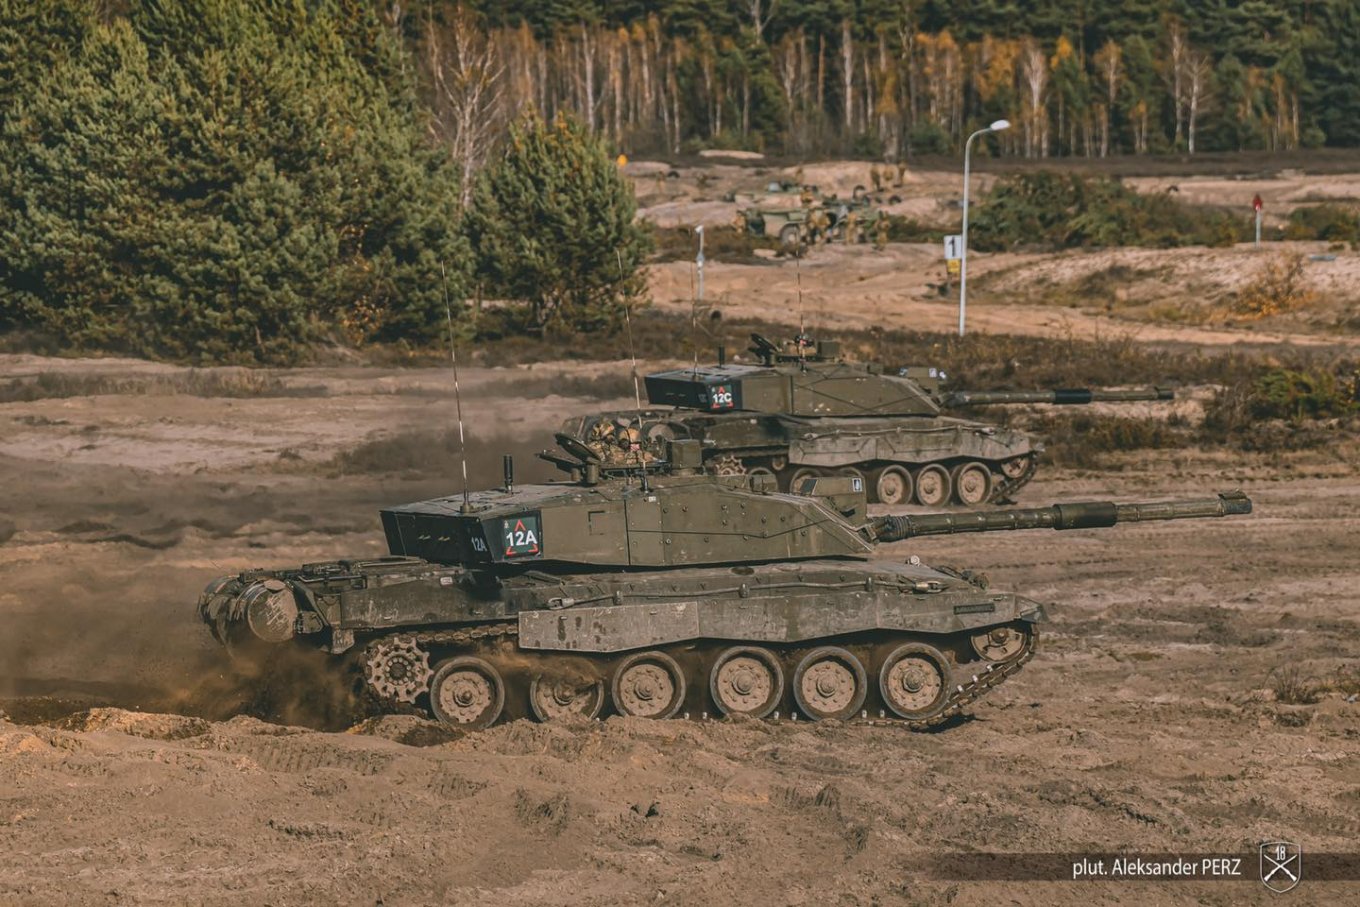 One of the episodes of the Puma-2022 maneuvers, Poland Preparing to Fight Against Russia with a help of Czech and British Tankmen, Defense Express